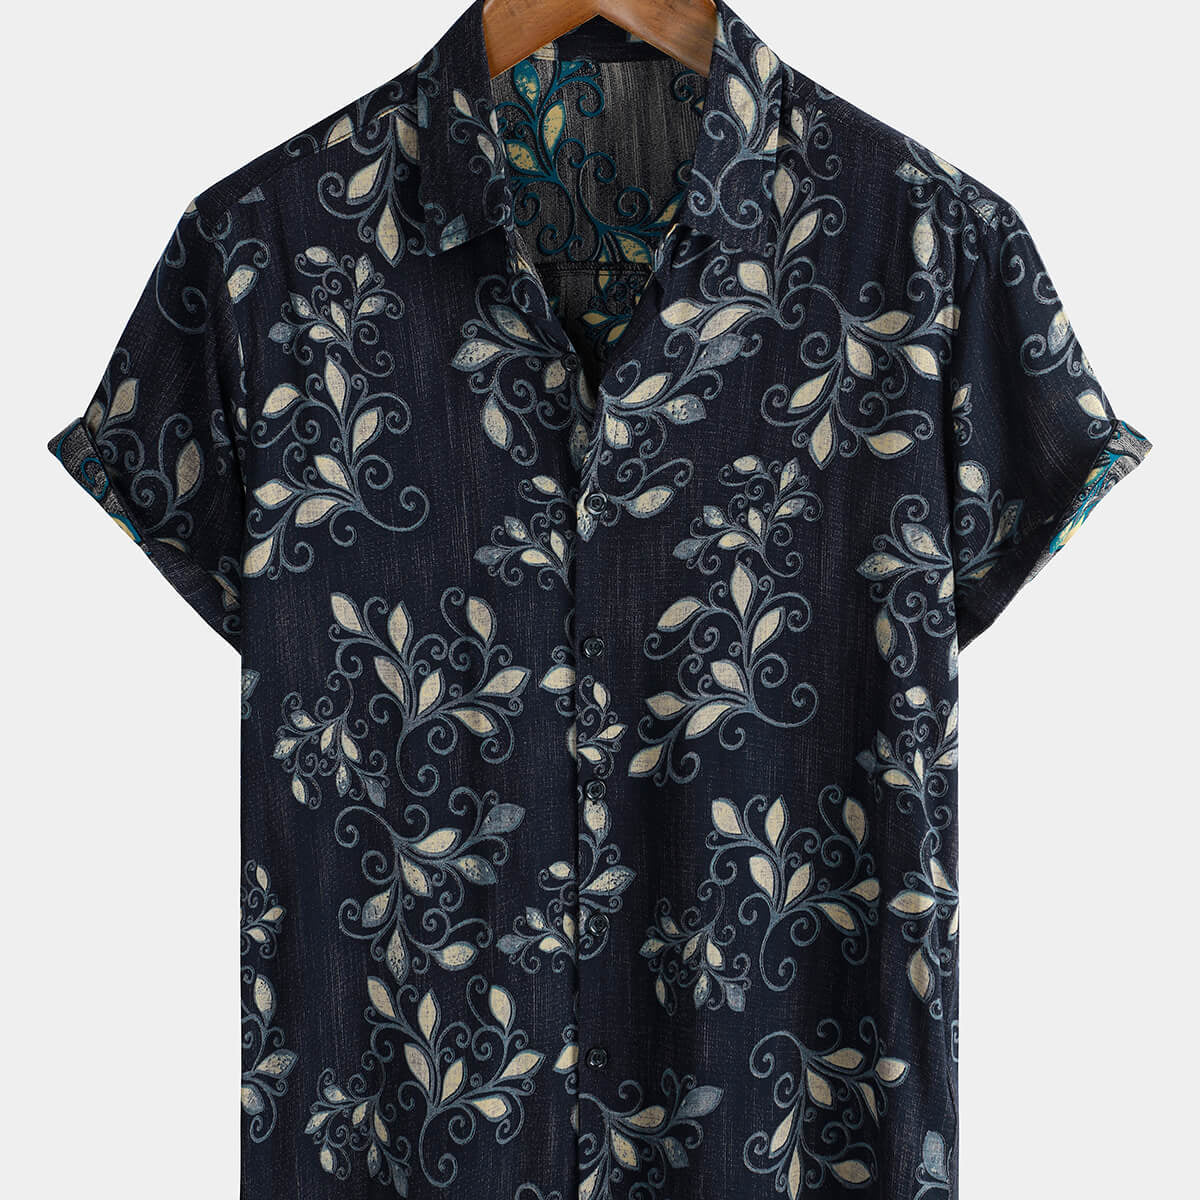 Men's Navy Blue Floral Holiday Casual Short Sleeve Button Up Shirt